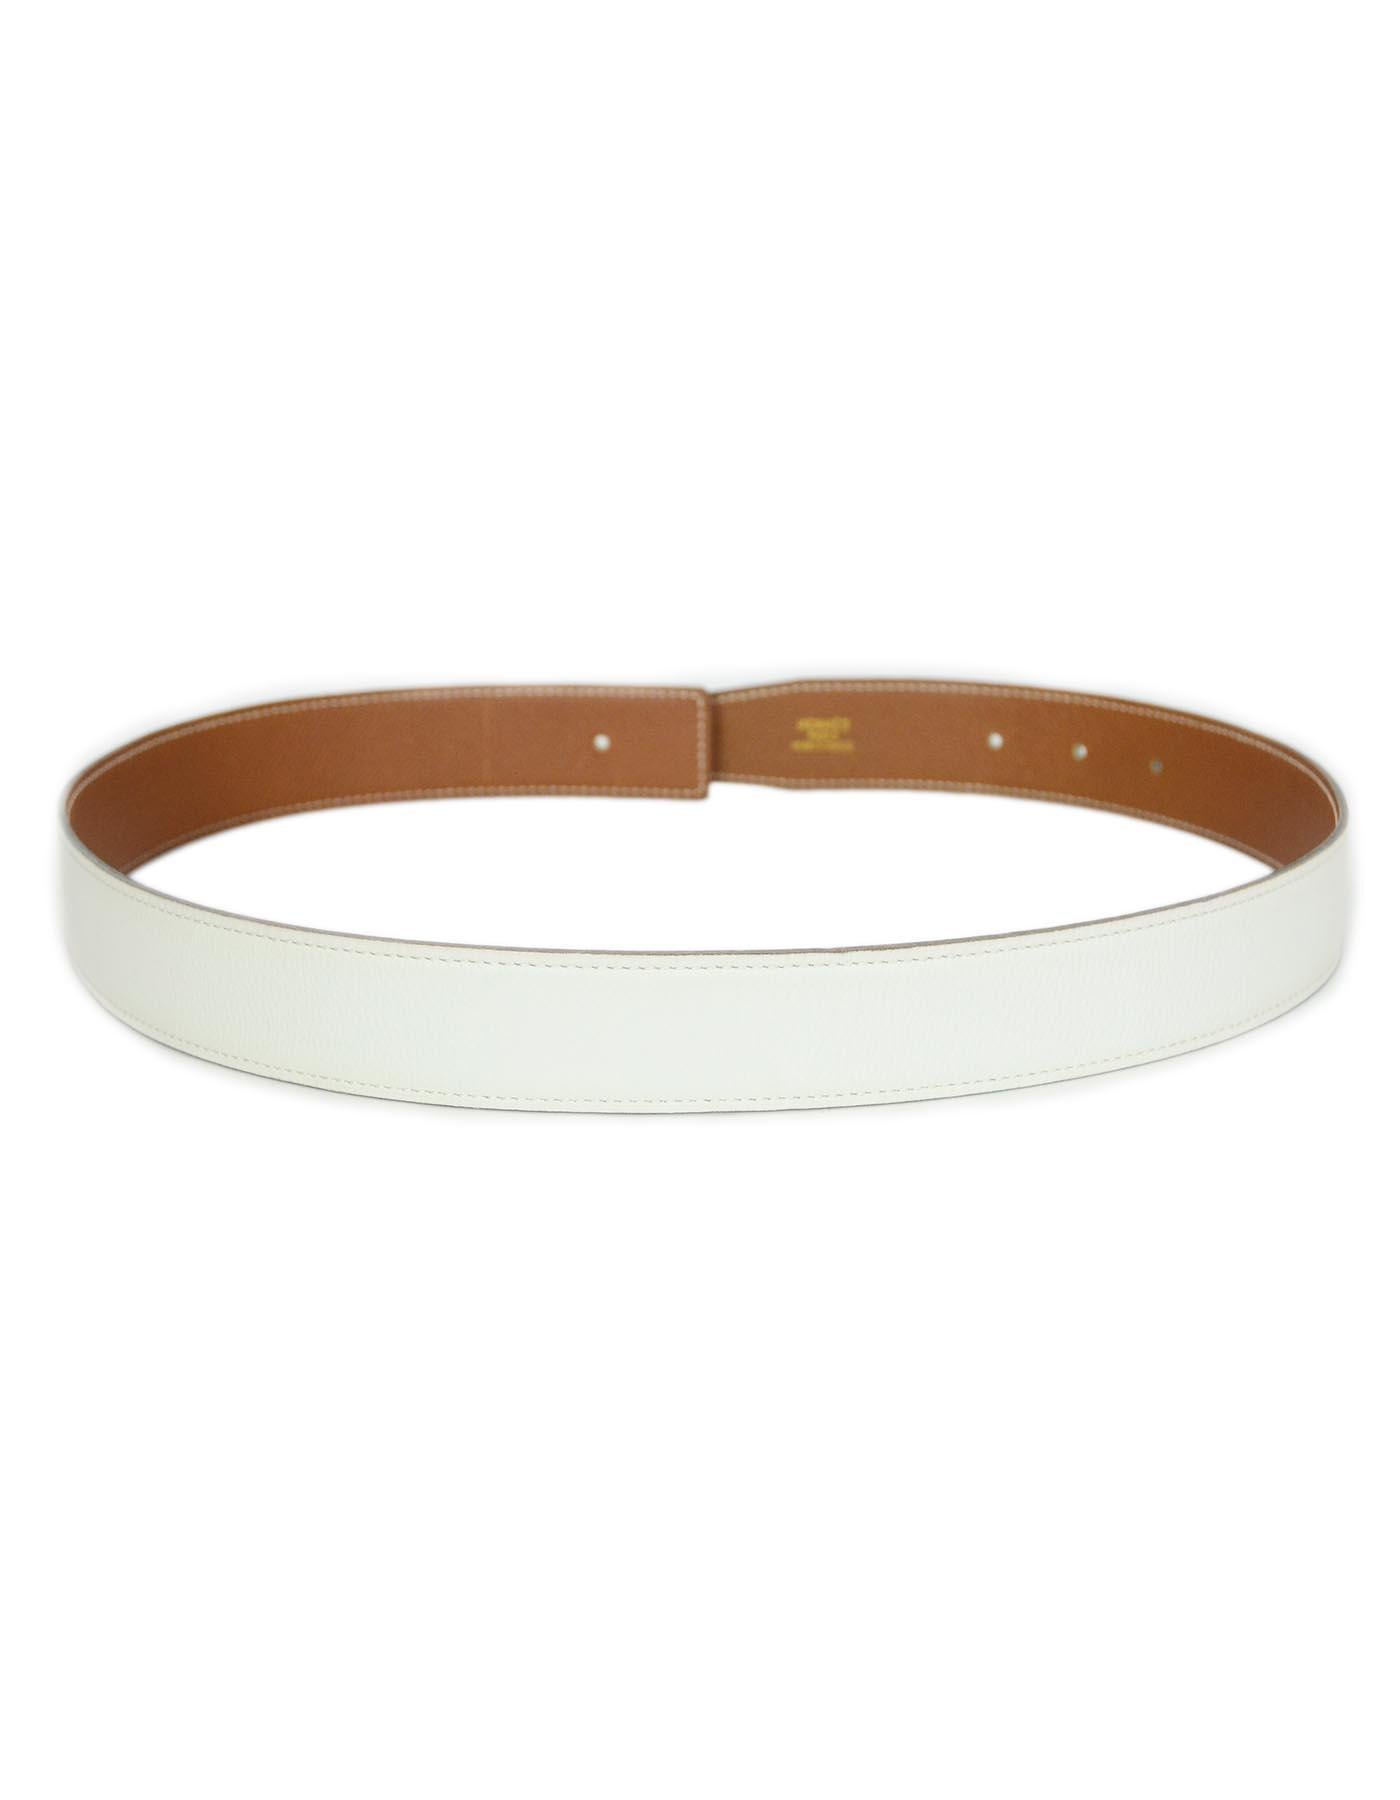 Hermes White/Tan Gold Leather Reversible 32mm Belt Strap 72

Made In: France
Year Of Production: 1998 (B in square marking on belt)
Color: White and tan gold (on reverse side)
Hardware: No belt buckle included 
Materials: Textured